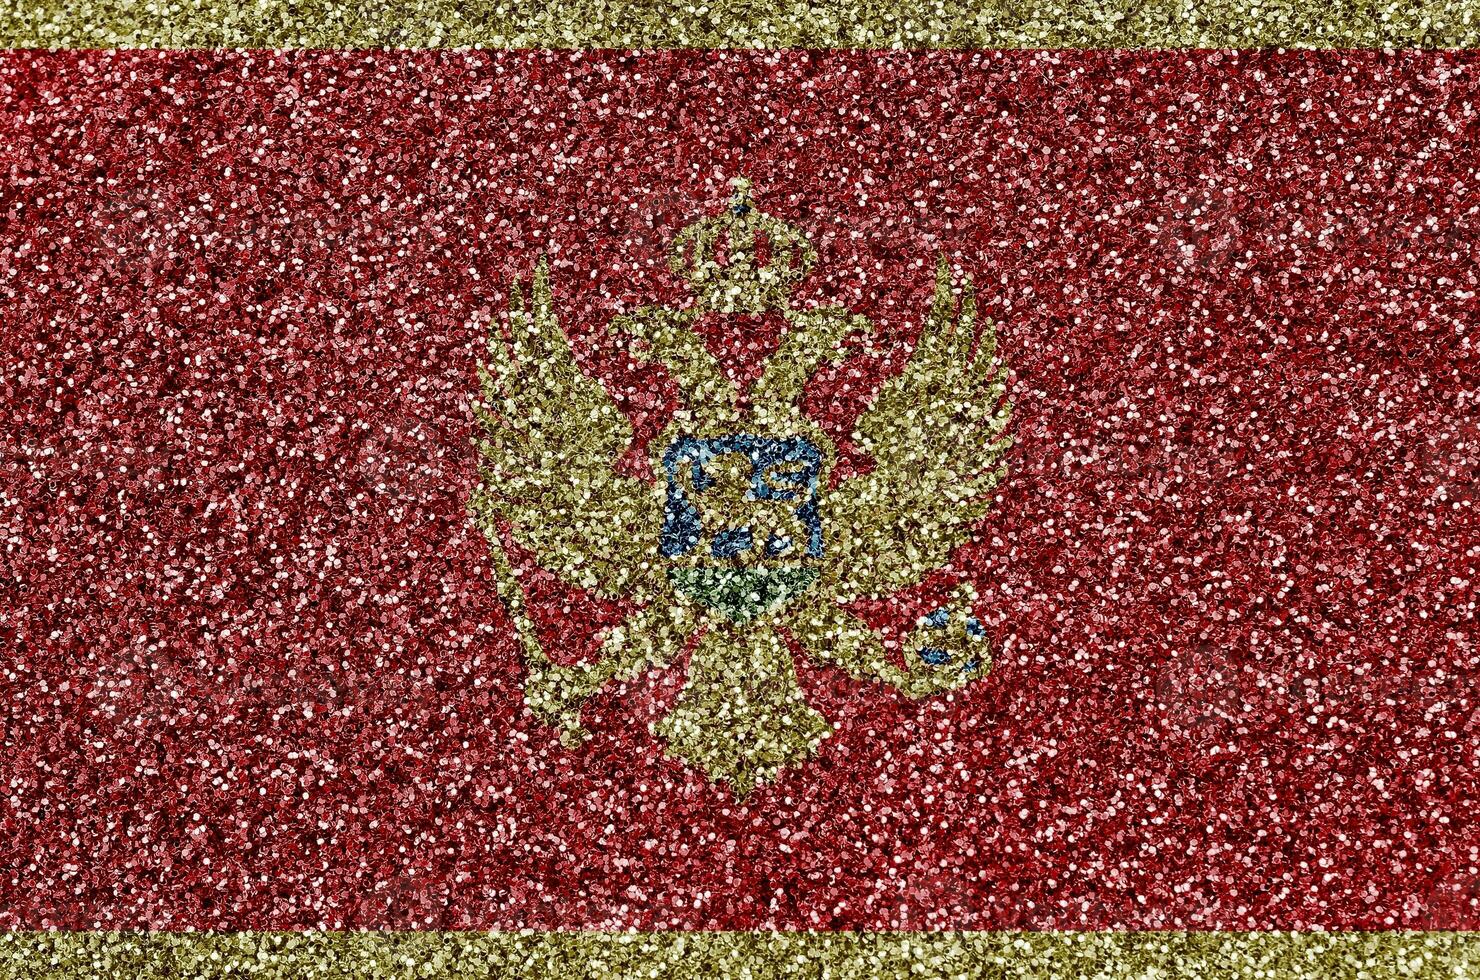 Montenegro flag depicted on many small shiny sequins. Colorful festival background for party photo